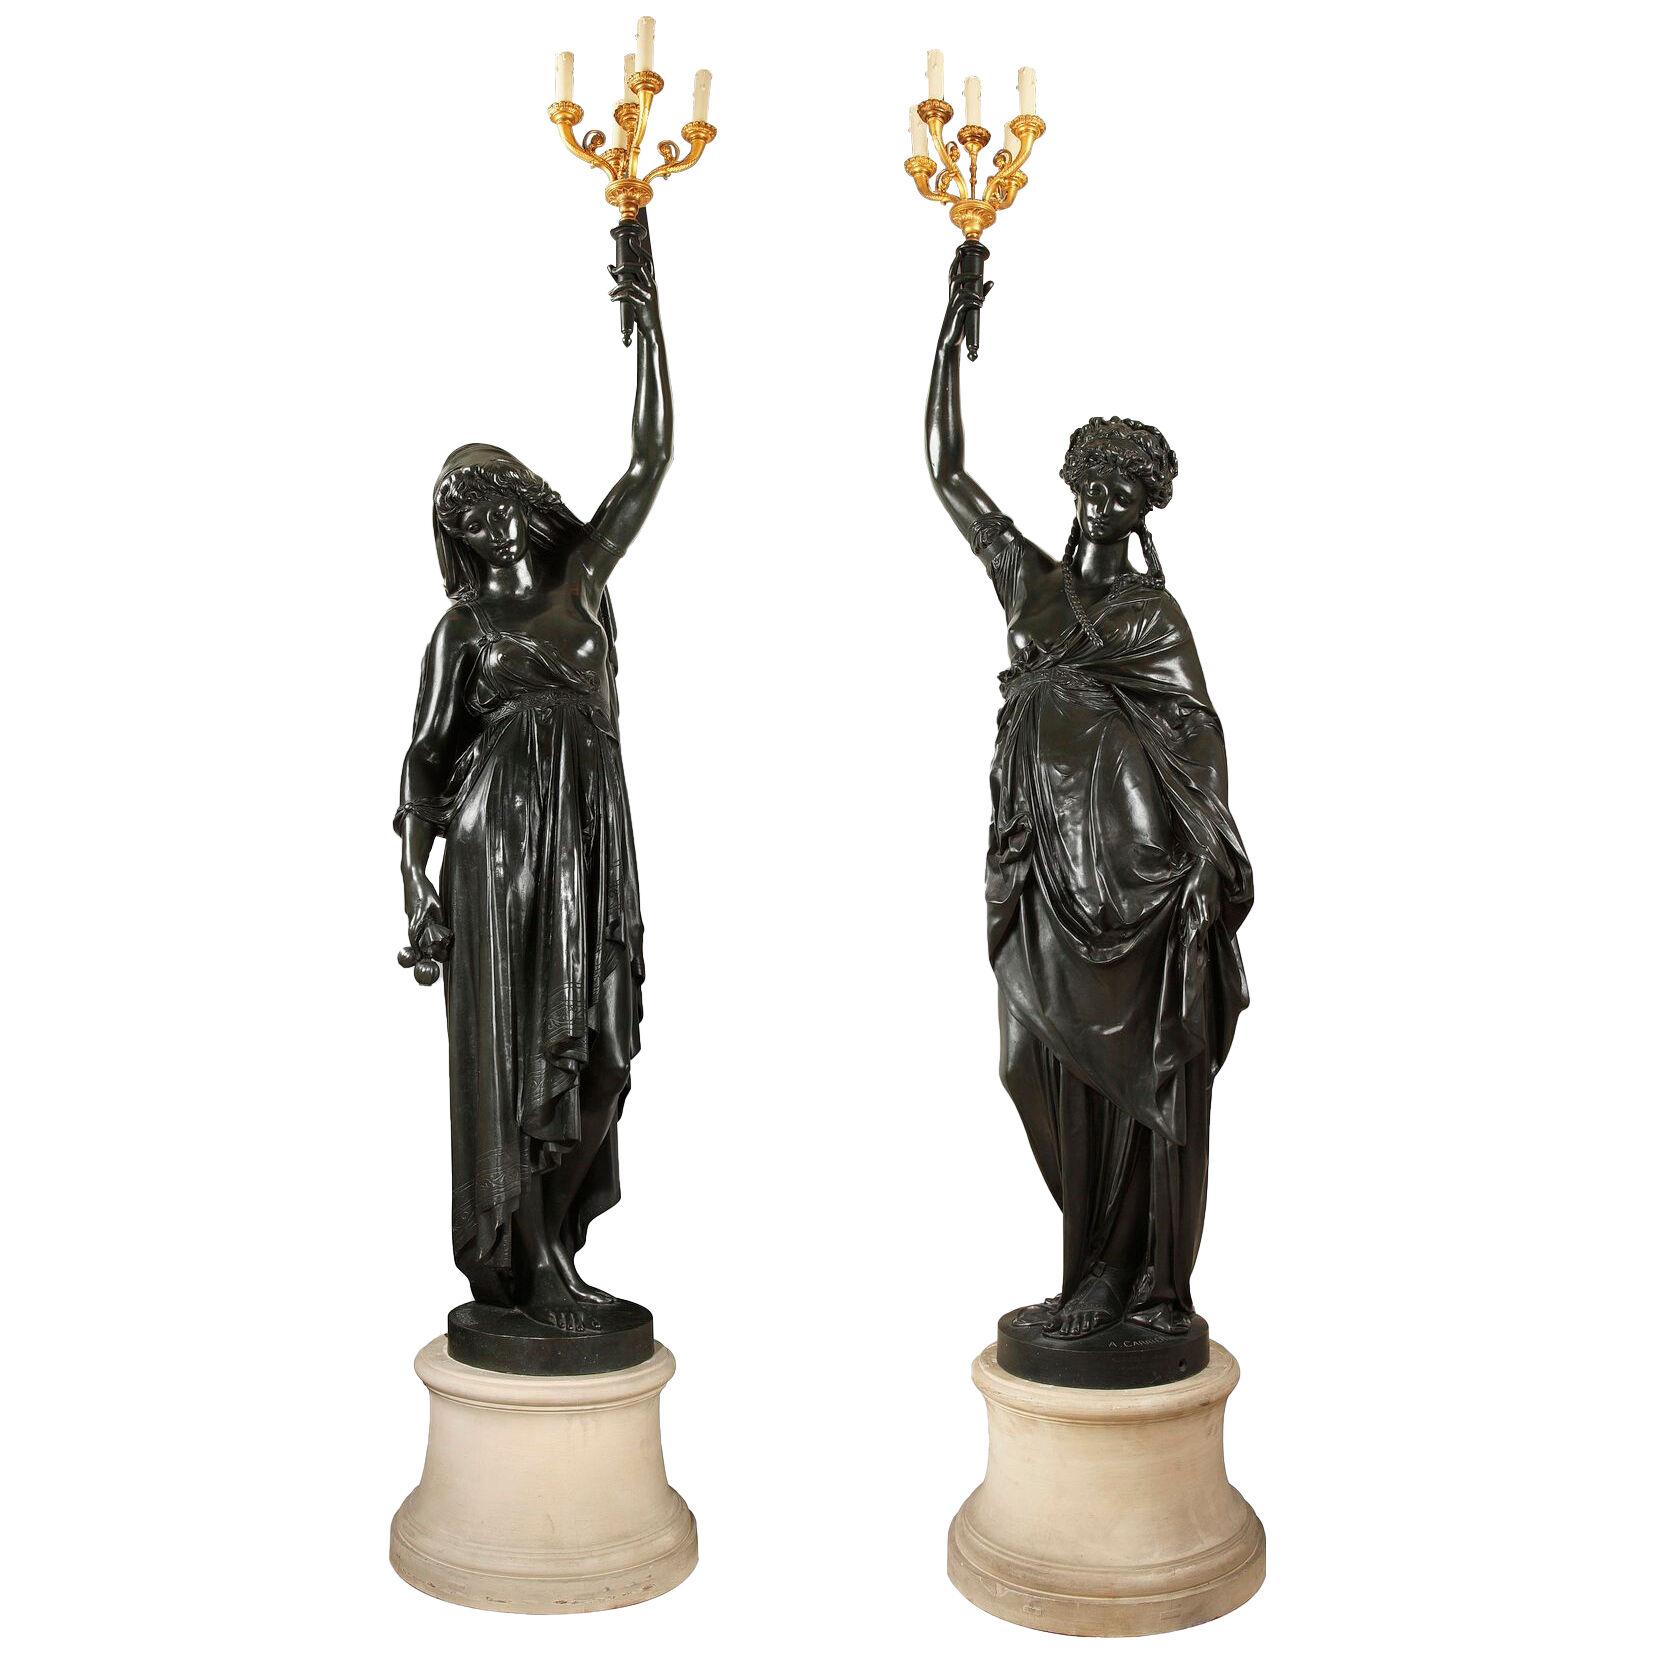 Pair of Bronze Torchères by E.Colin after a Model by A. Carrier, France, c. 1900